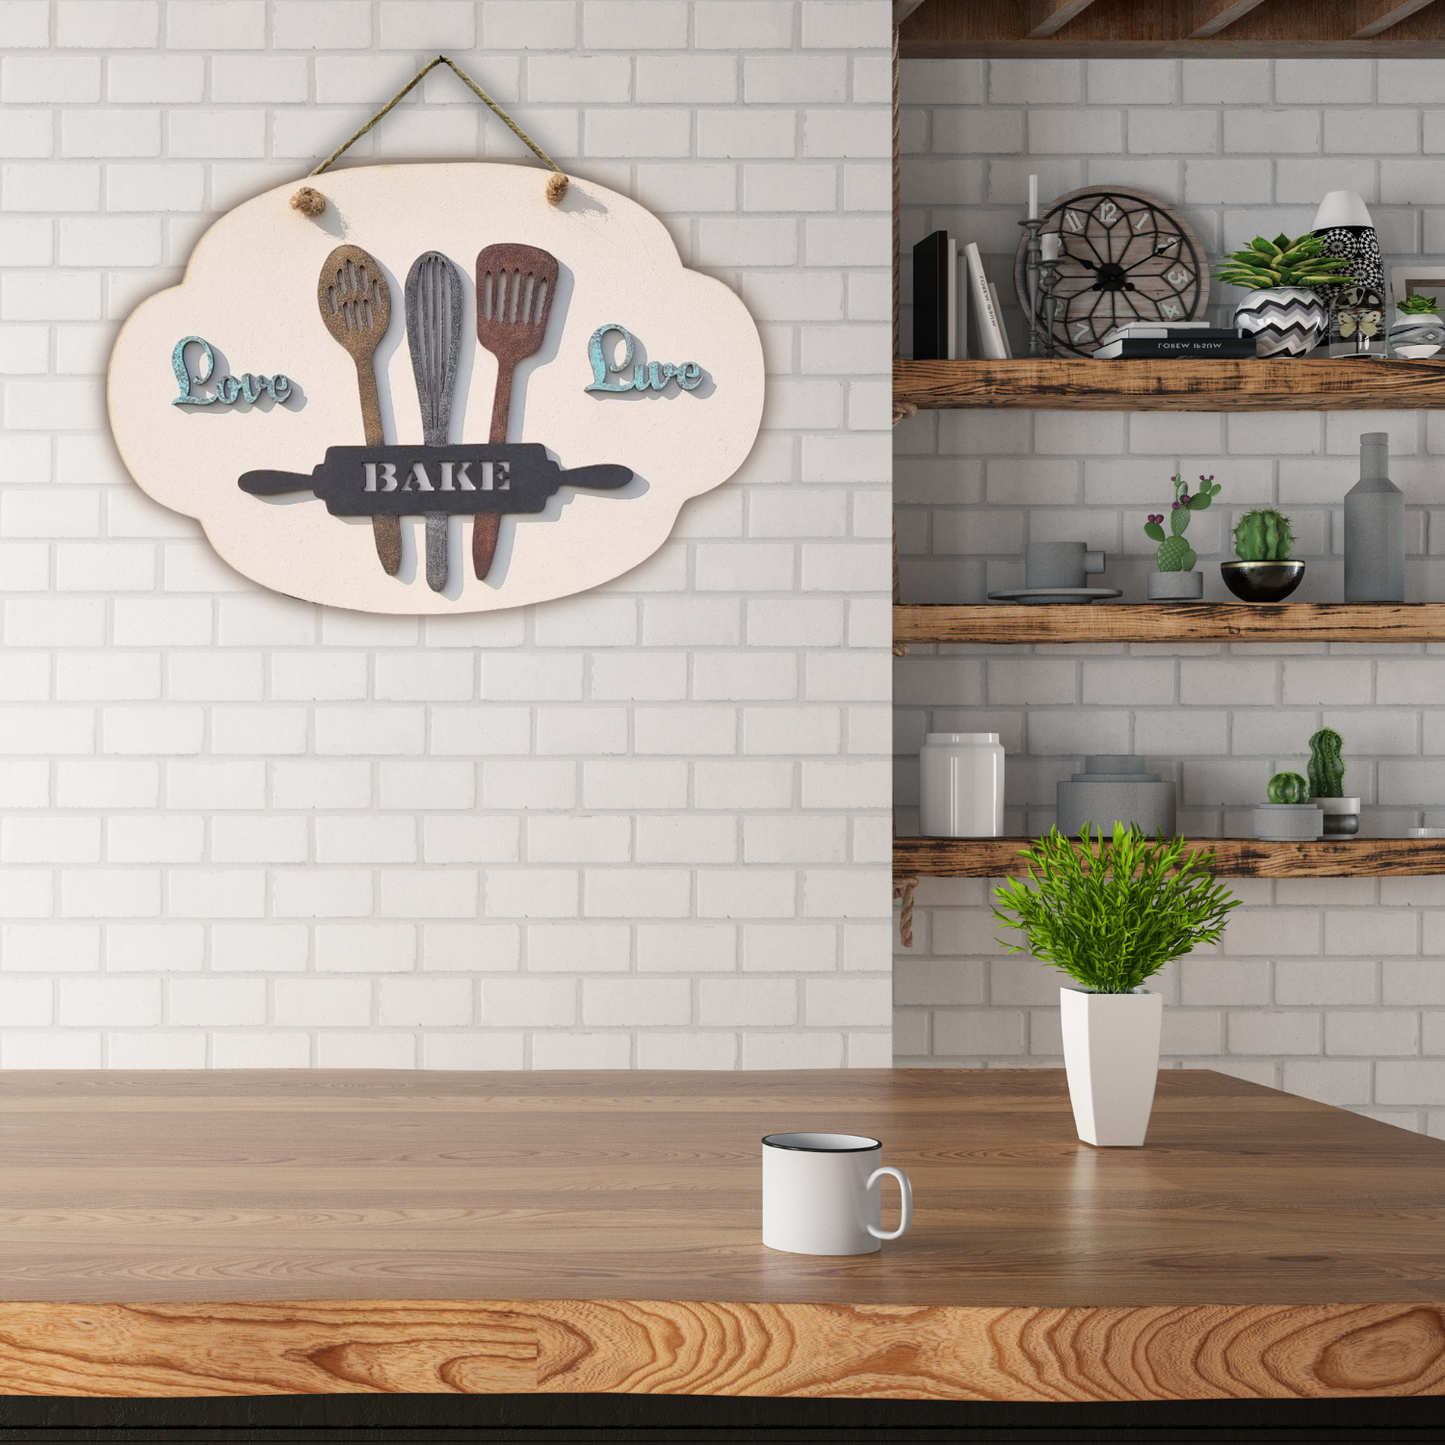 Love, Live and Bake Quote Kitchen Wall Art For Personalization